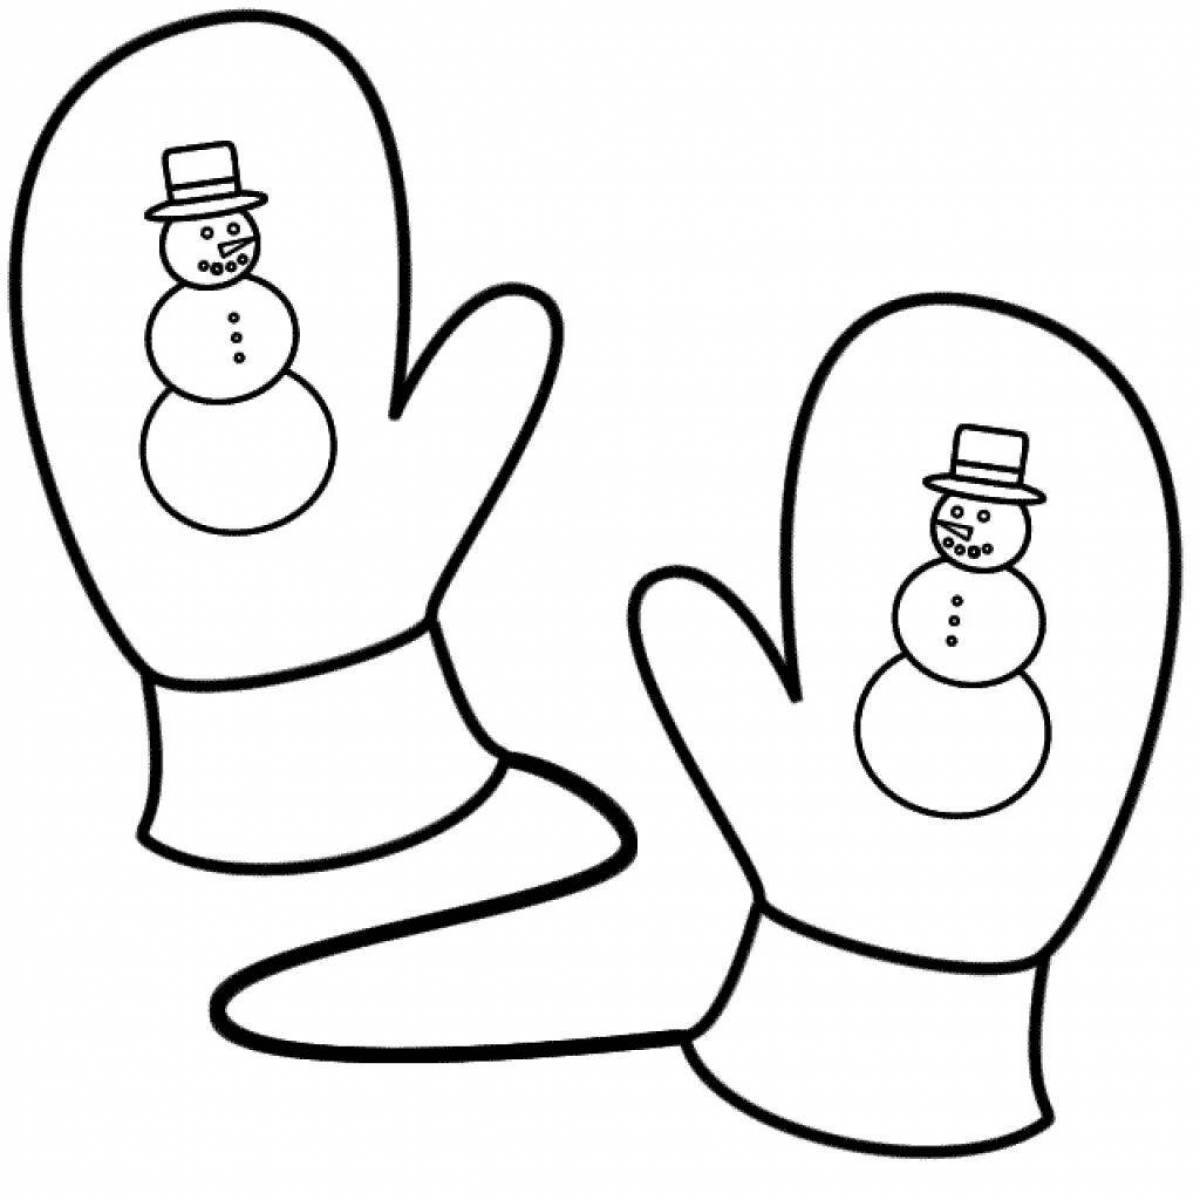 Coloring book funny patterned mittens